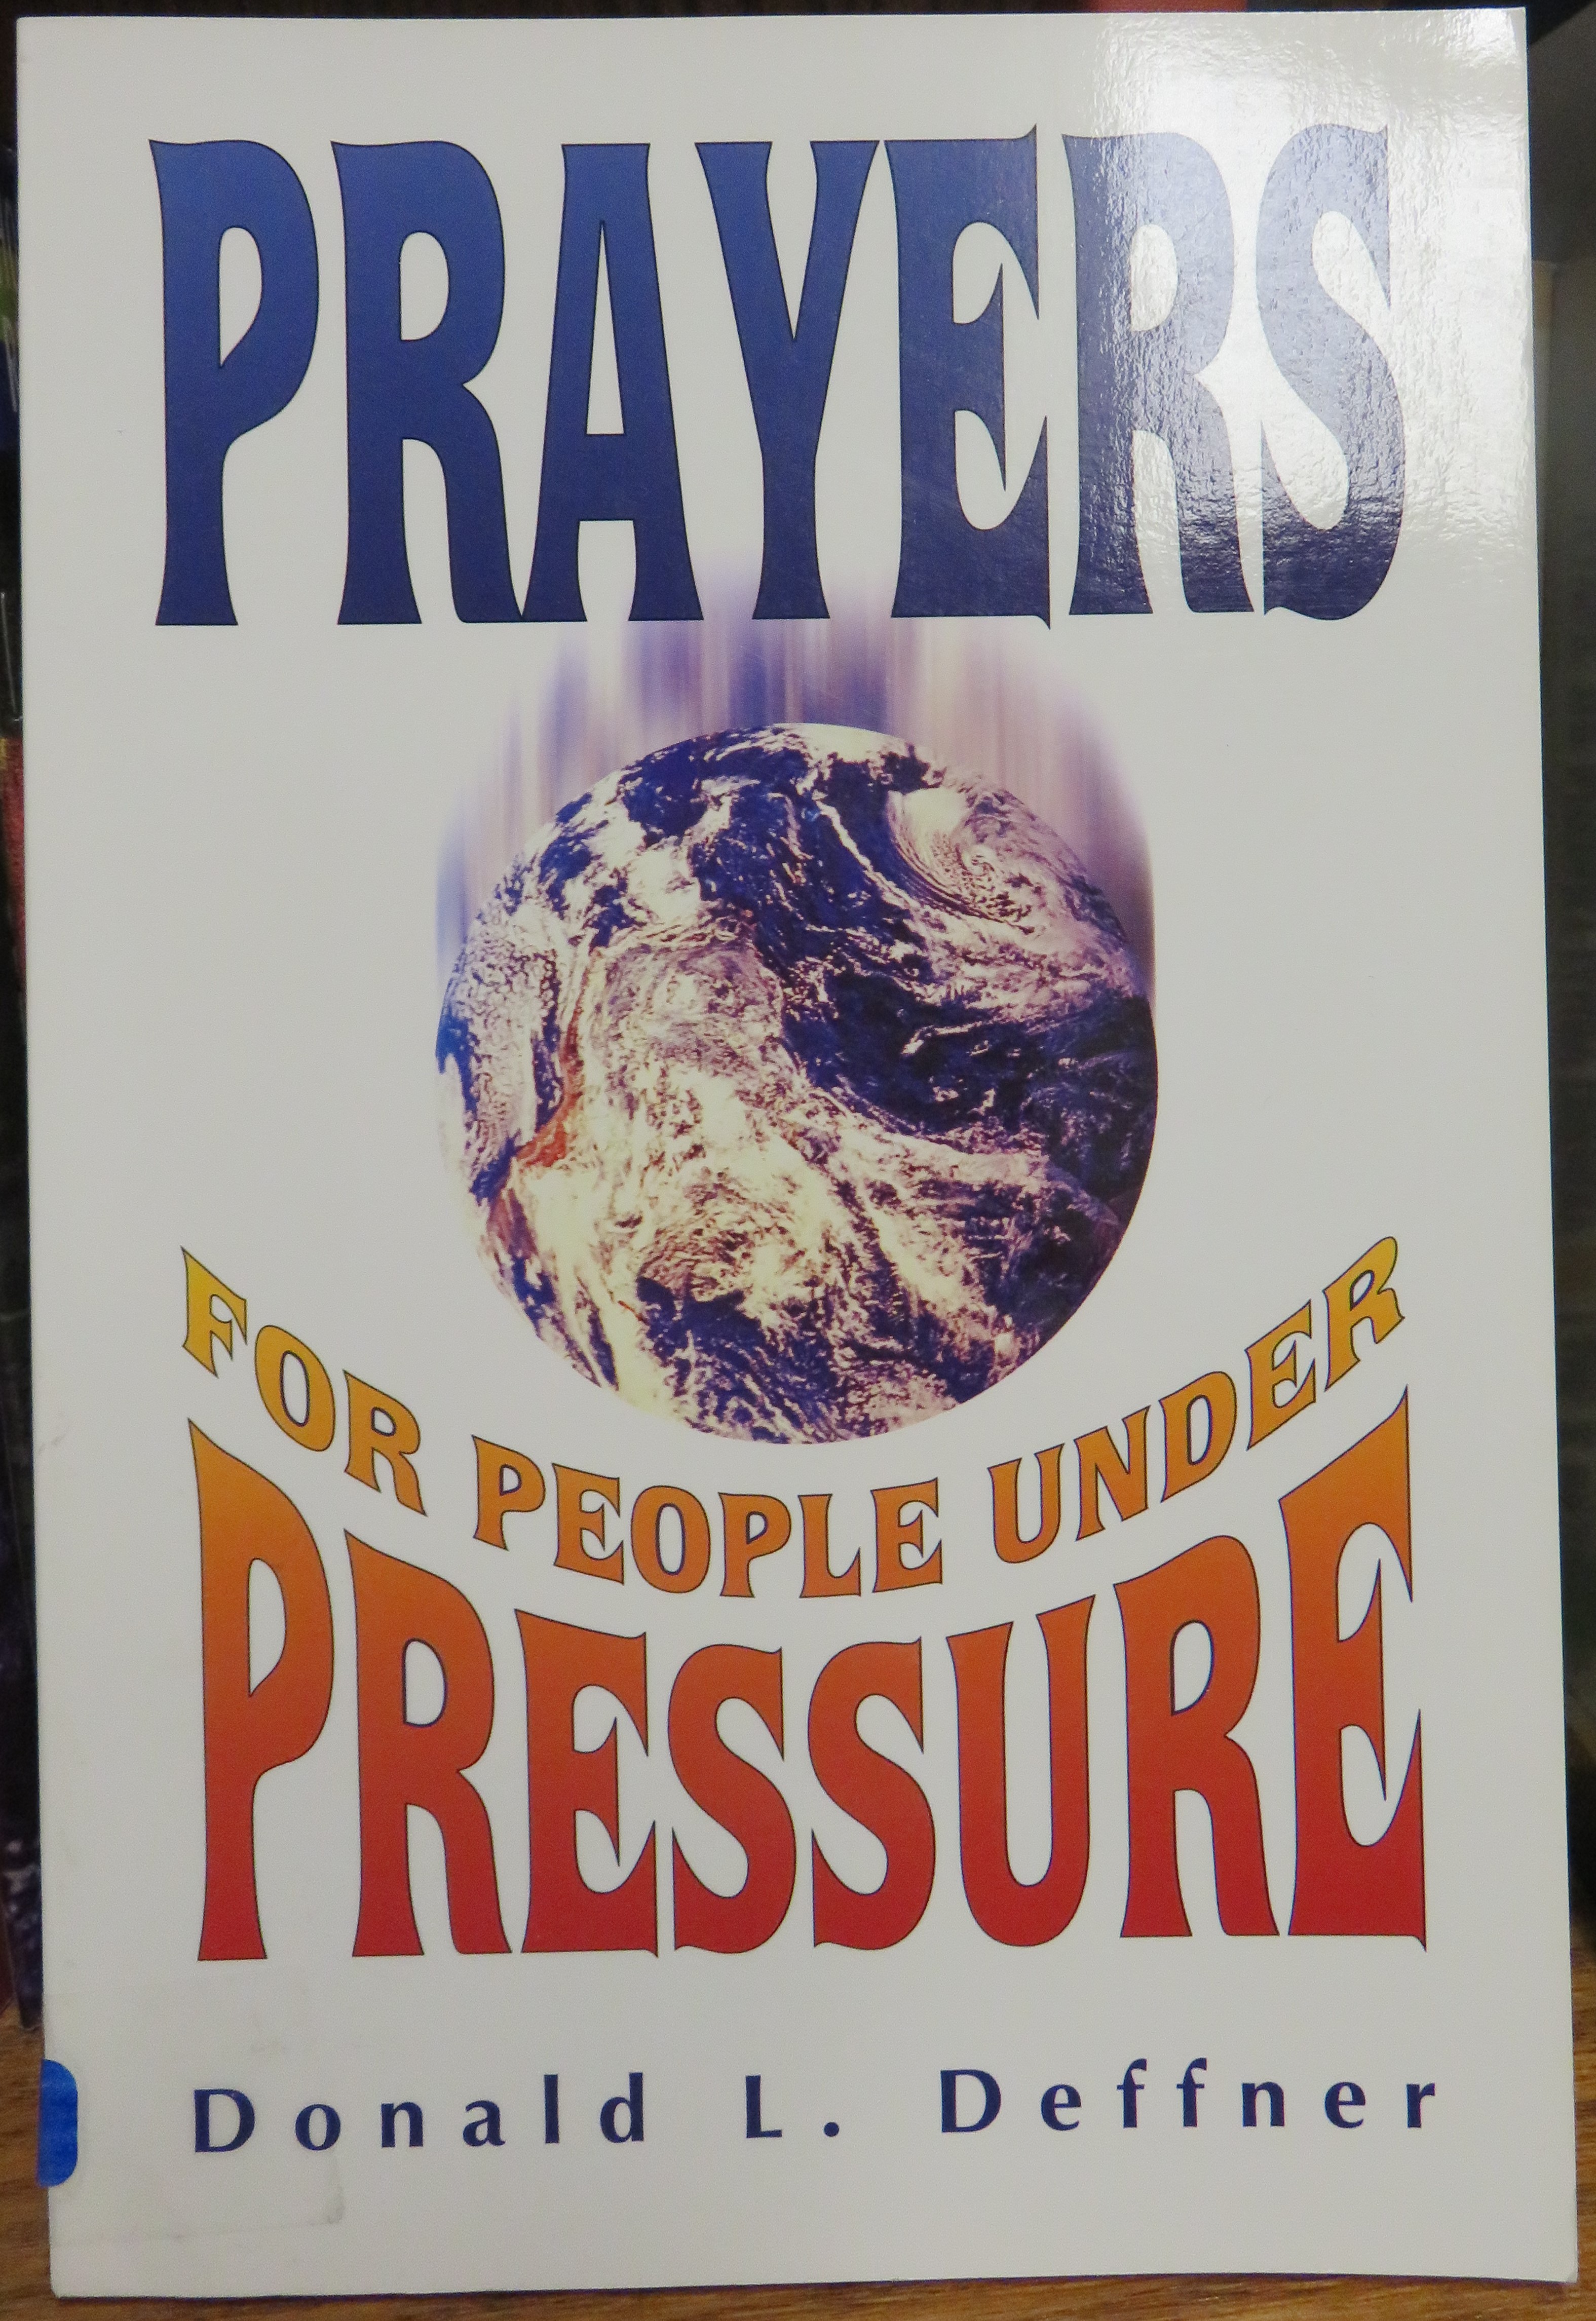 Prayers for People Under Pressure